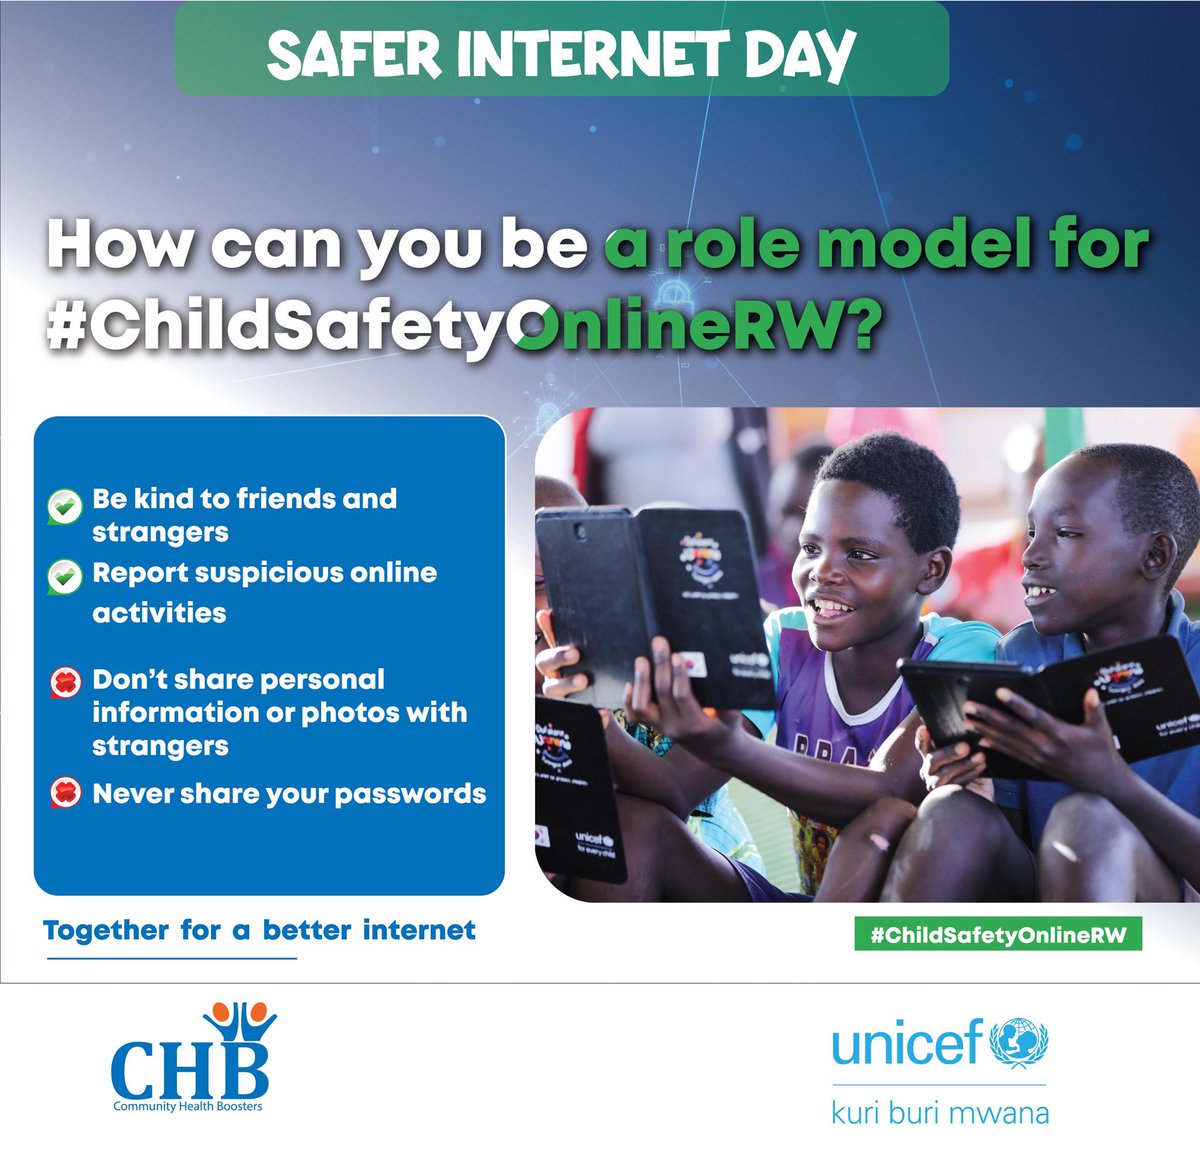 Today, on #SaferInternetDay, let’s pledge to educate our children about online safety. Internet is powerful tool, but it’s crucial to teach them to protect their personal info & stay safe online. Together, we can create a safer digital world for our kids. #ChildSafetyOnlineRW